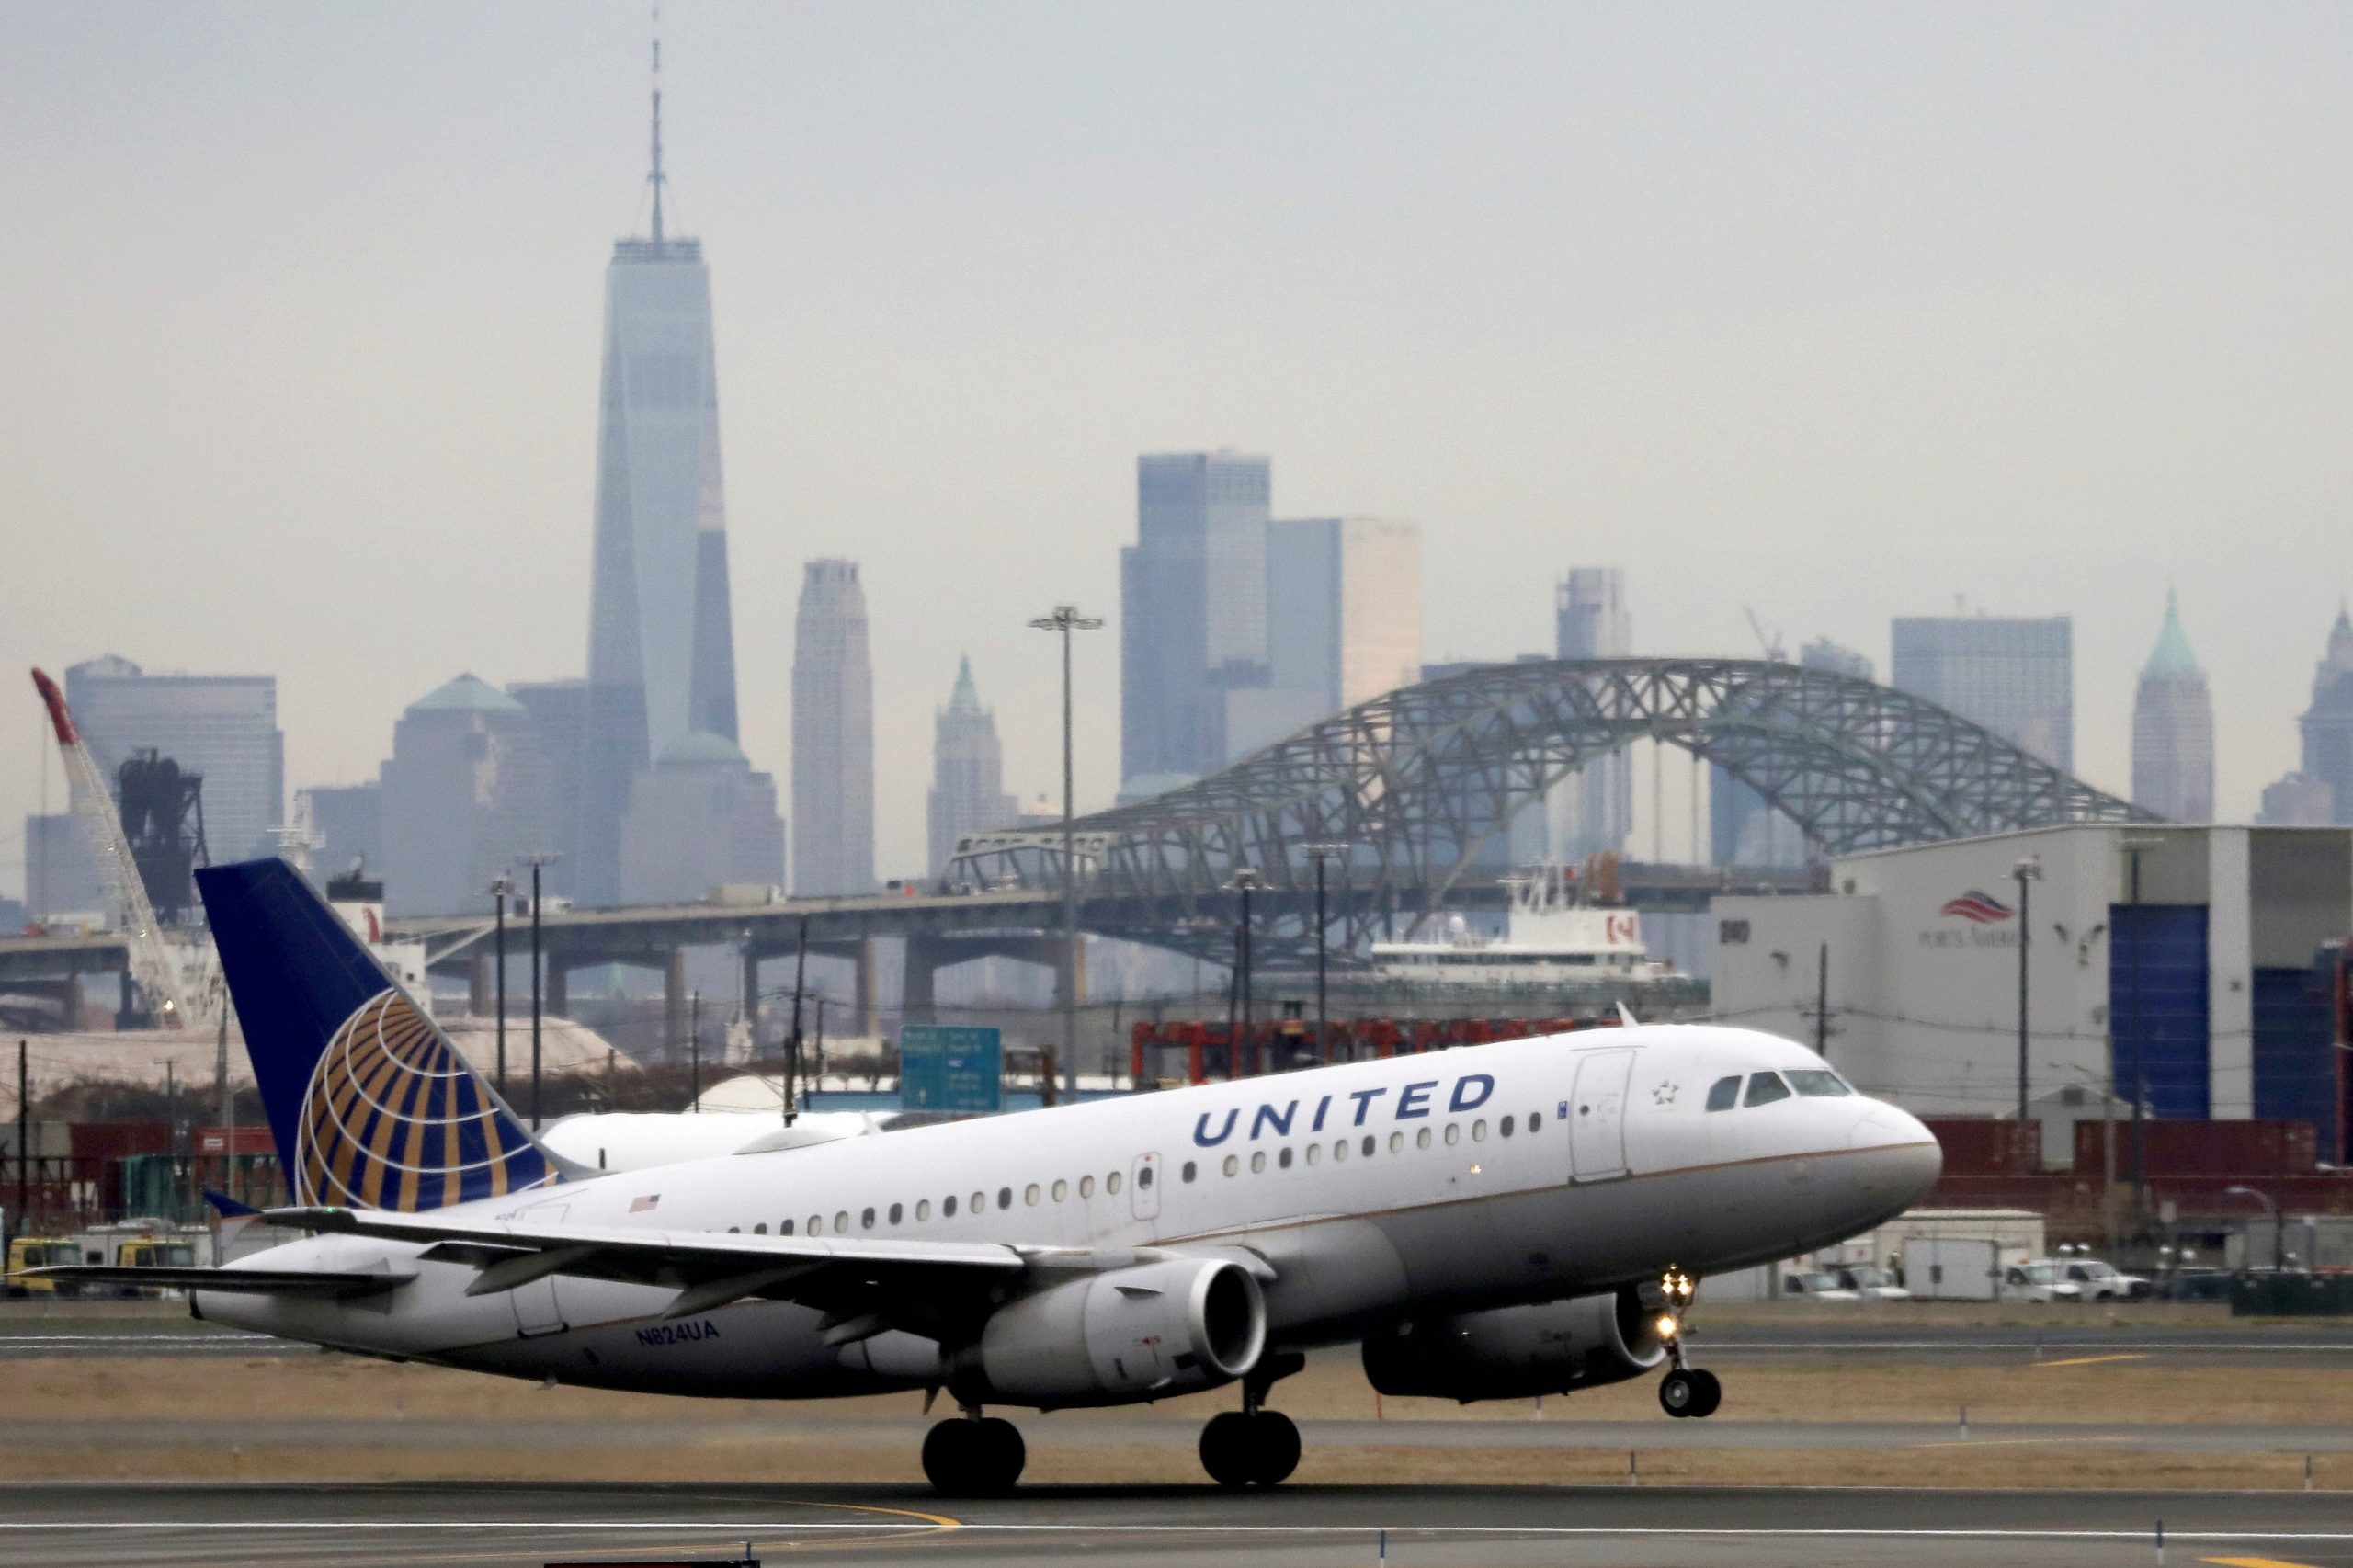 A white United Airlines plane sits on a runway in front of the New York City skyline.